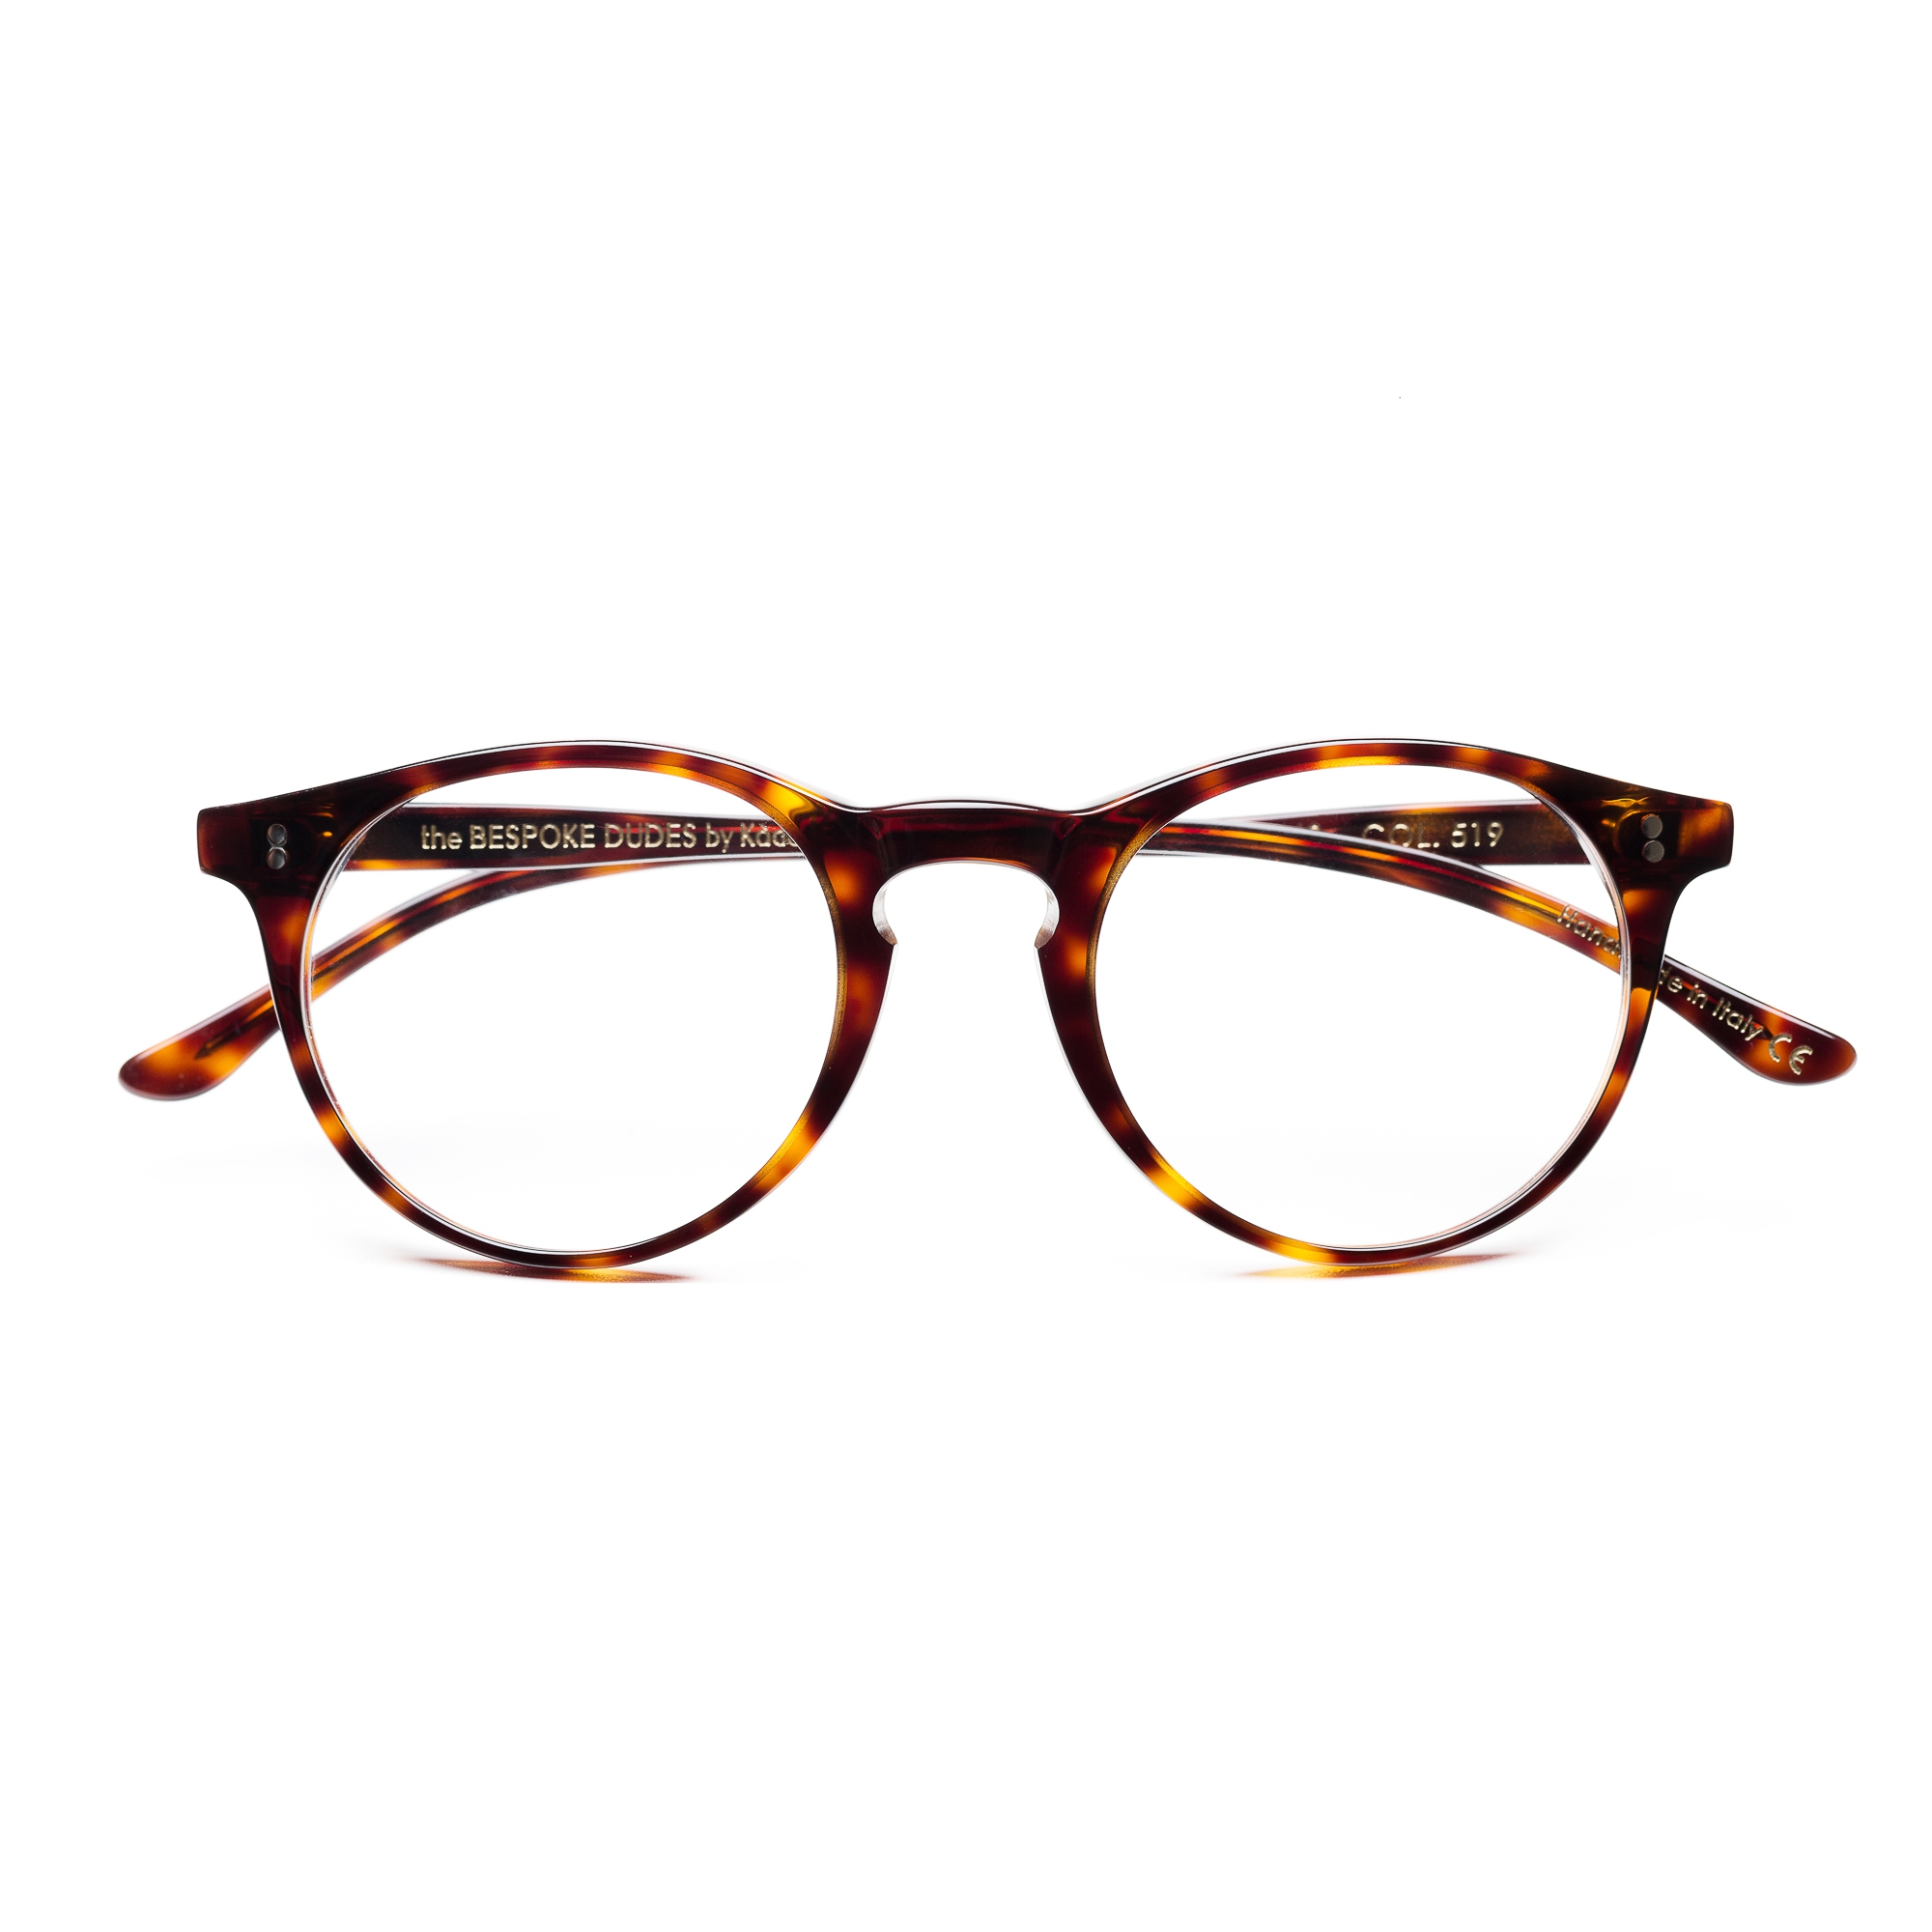 Pleat  The second collection of TBD Eyewear